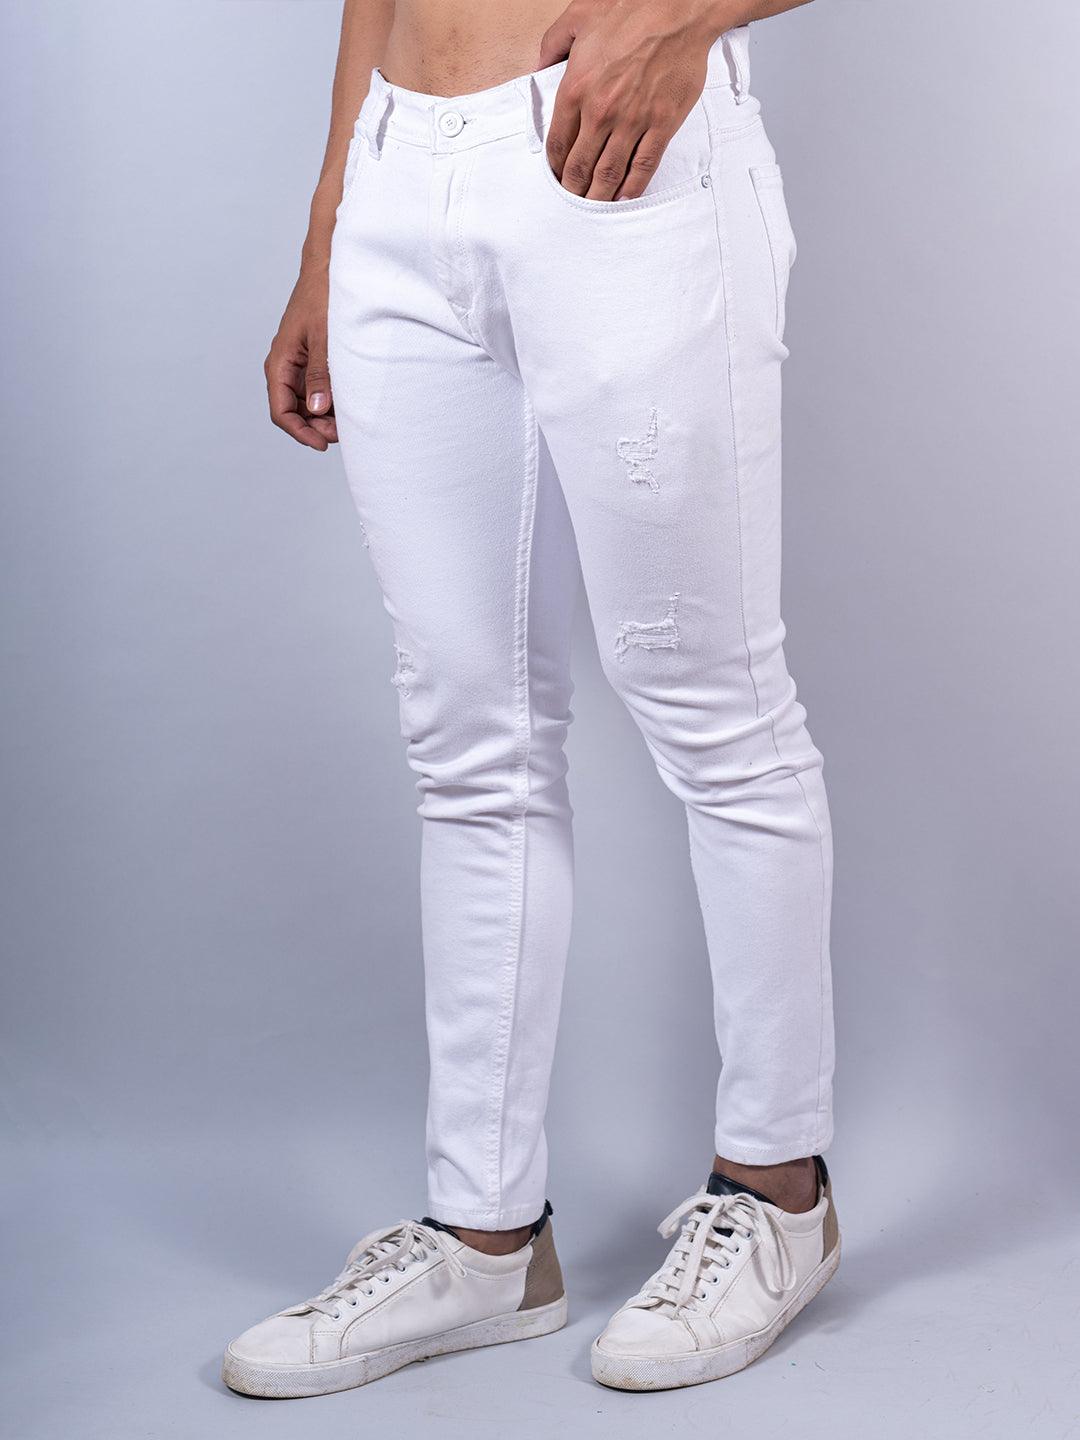 Best White Jeans Outfits For Men | Bewakoof Blog